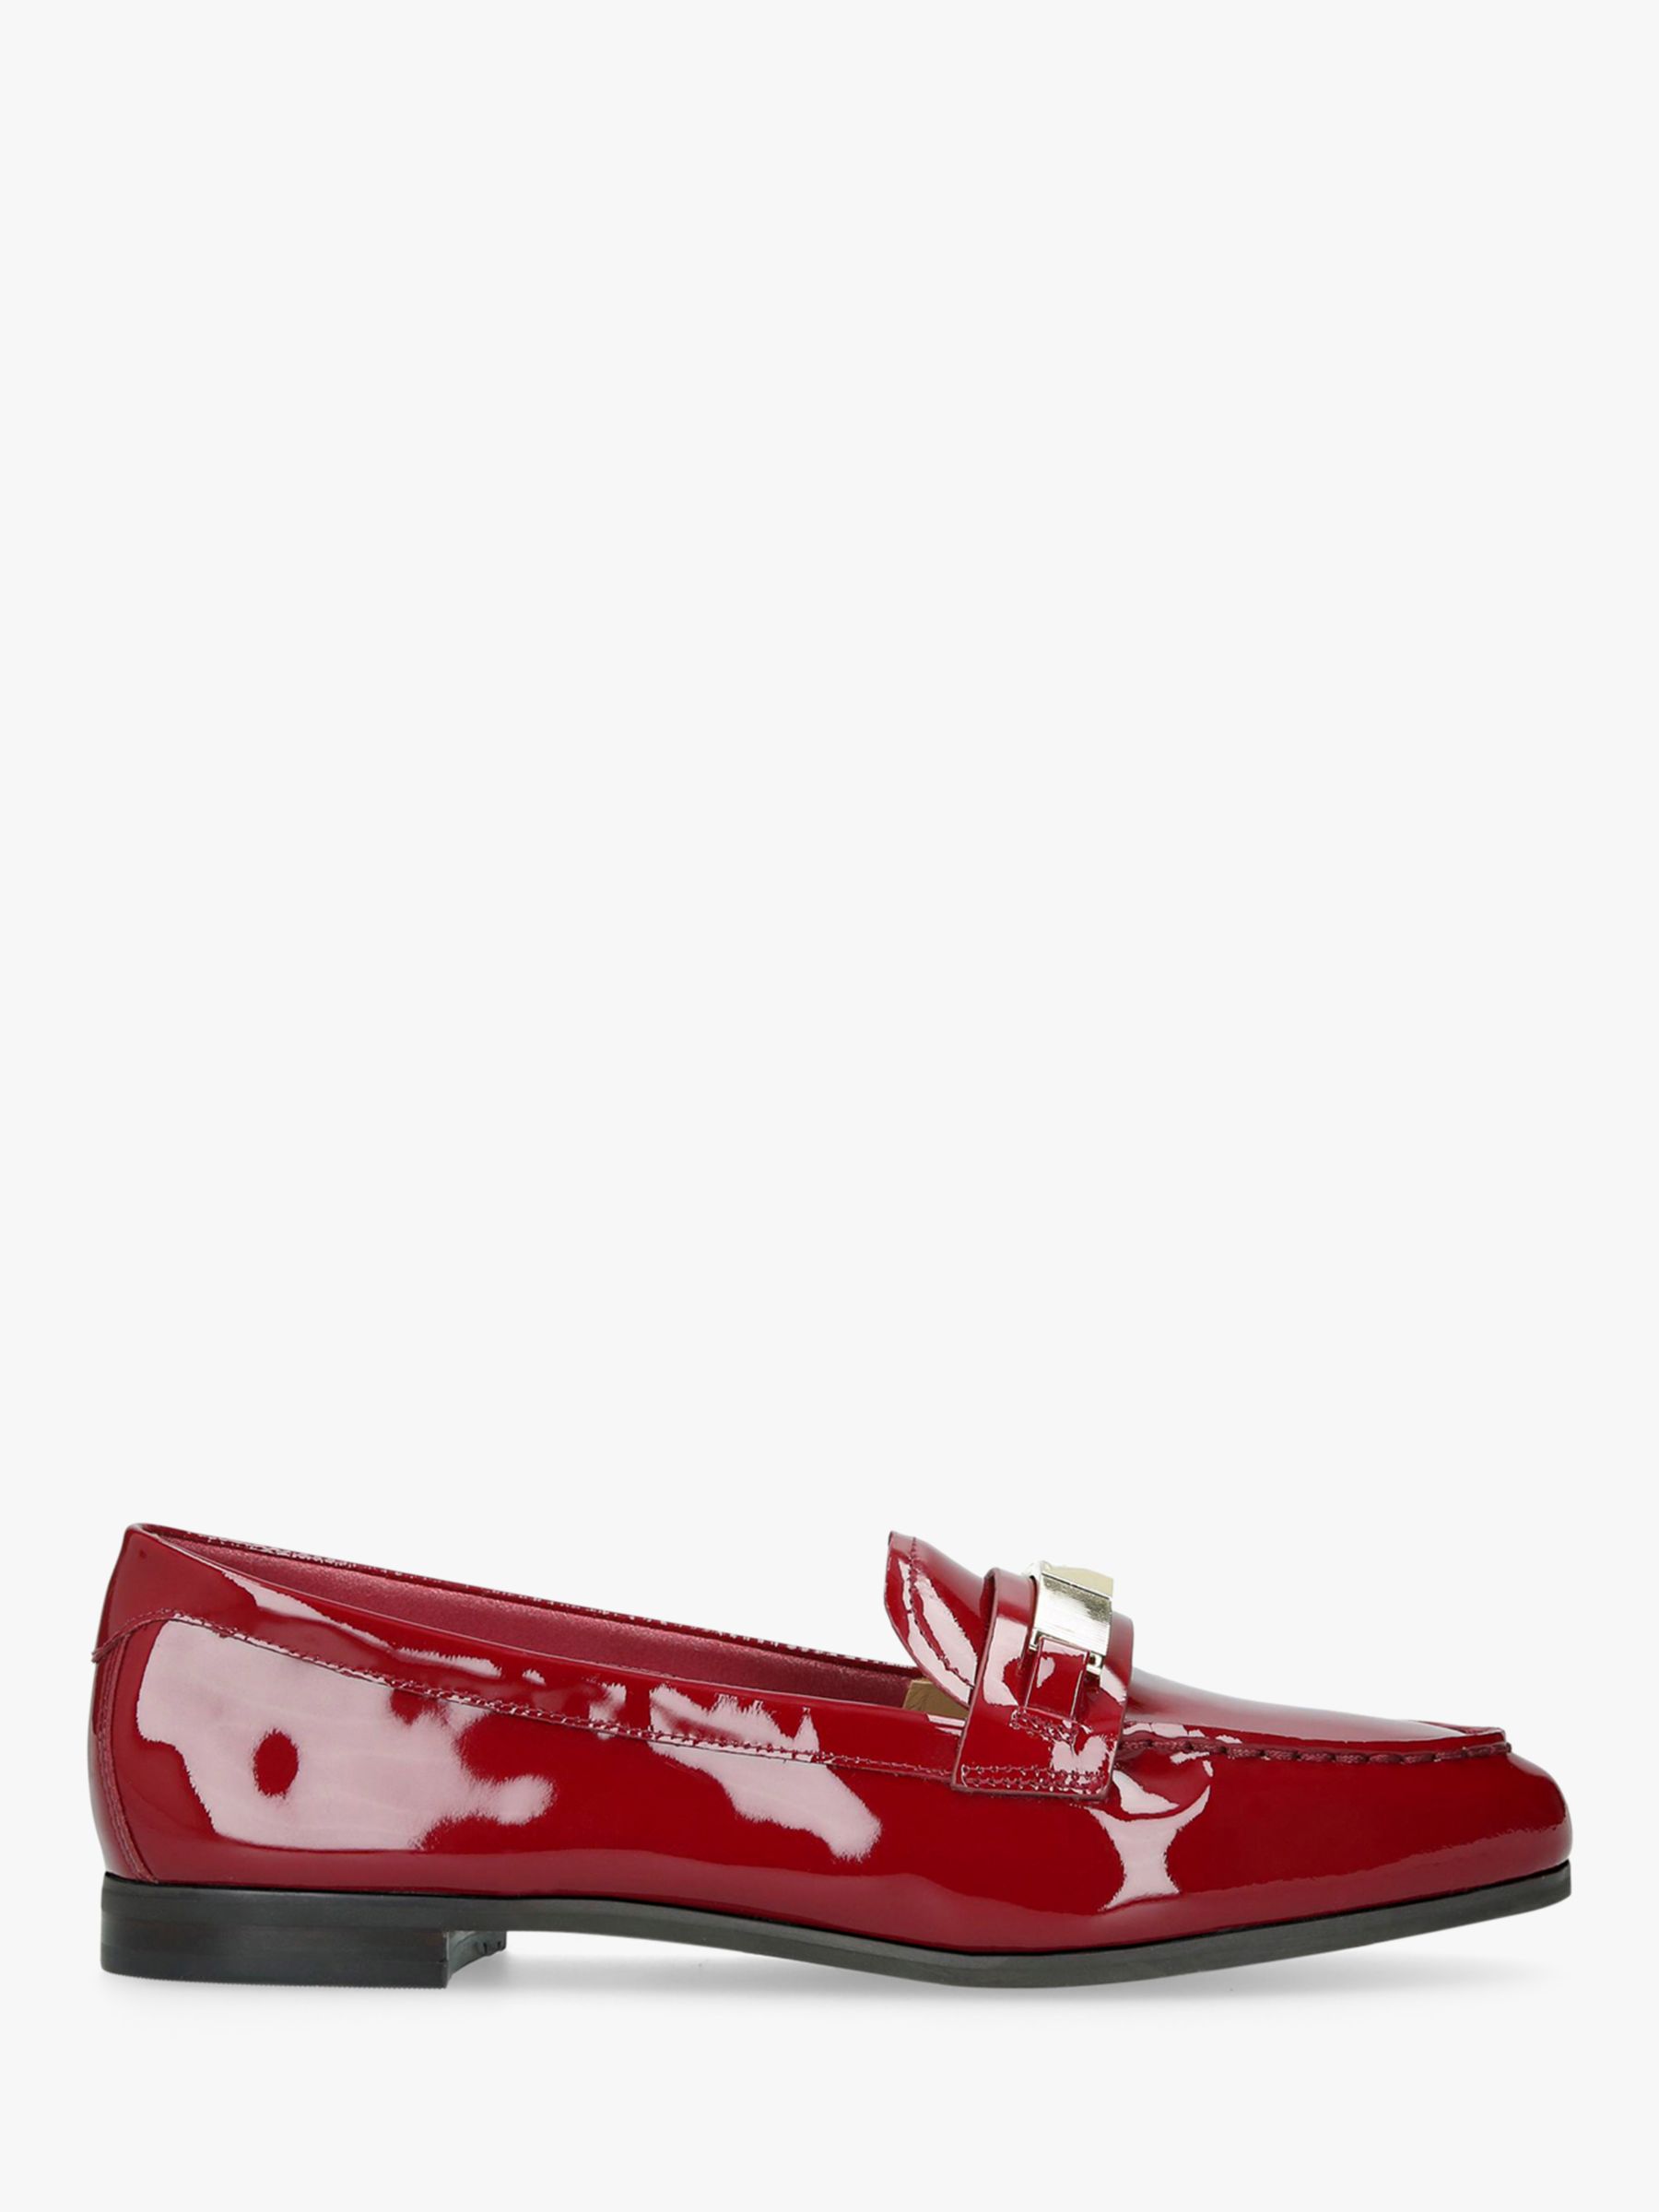 michael kors loafers womens red